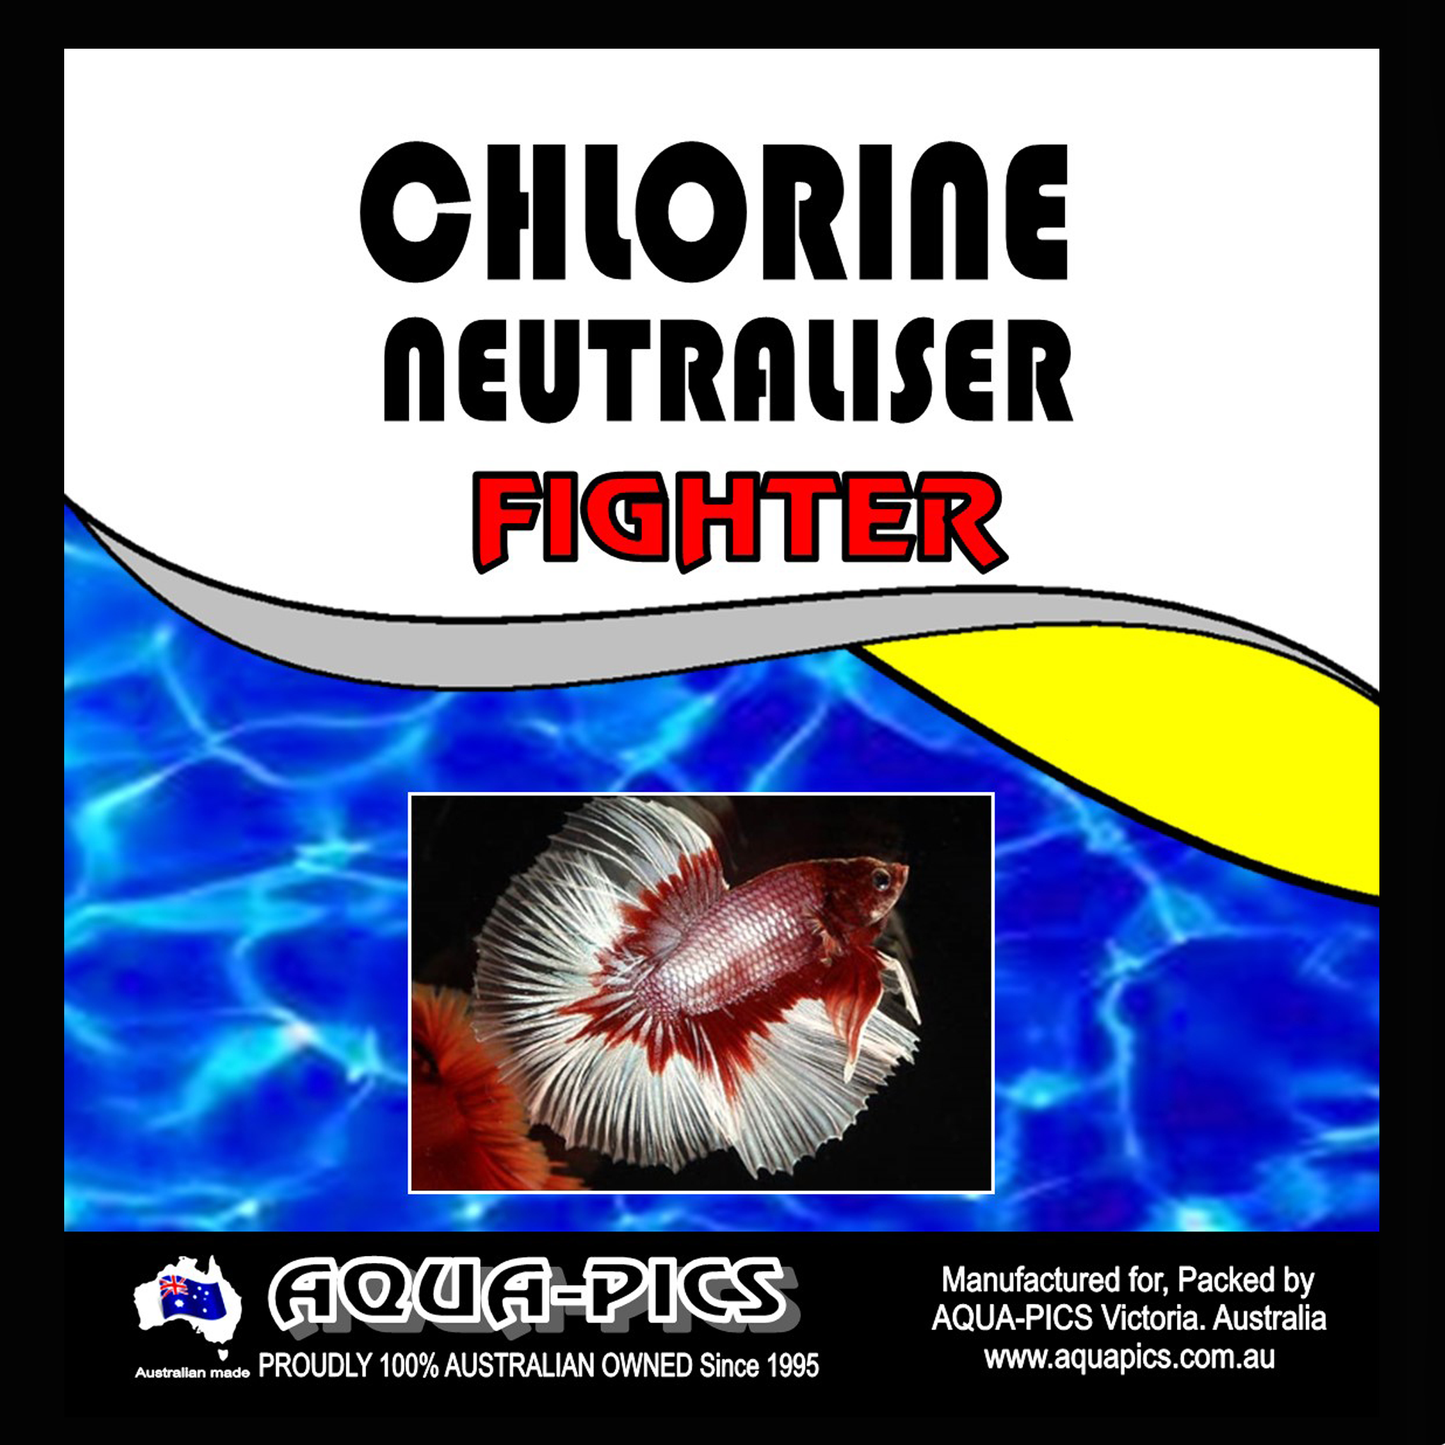 Chlorine Neutralizer for Fighters 250ml